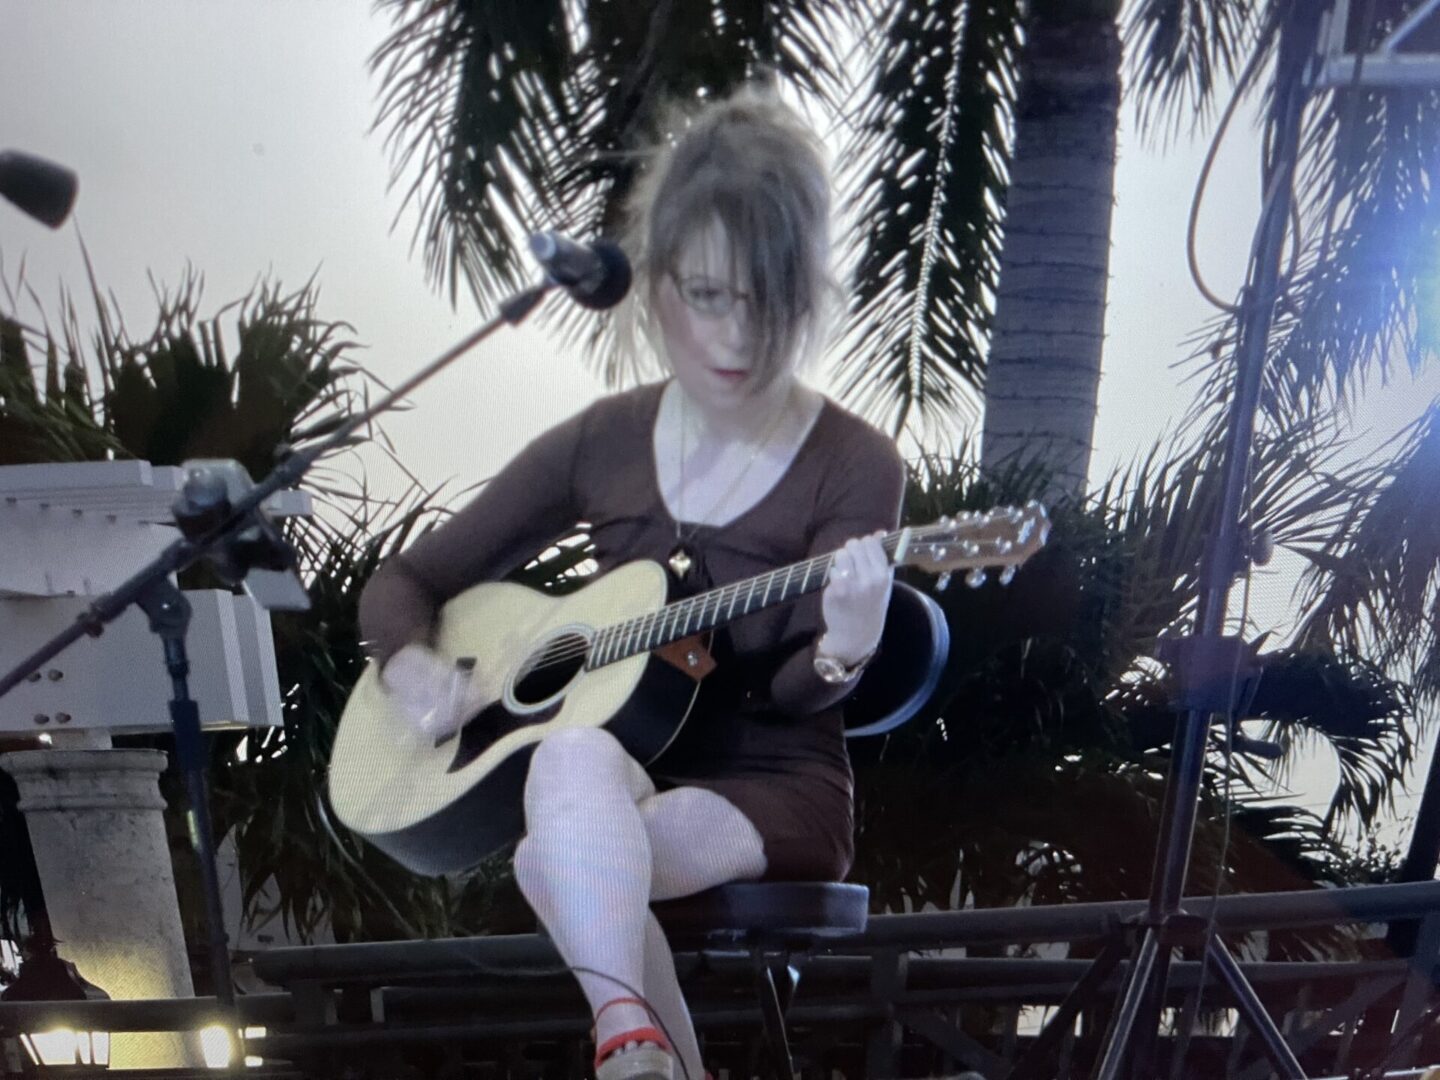 A woman sitting on top of a bench playing an acoustic guitar.